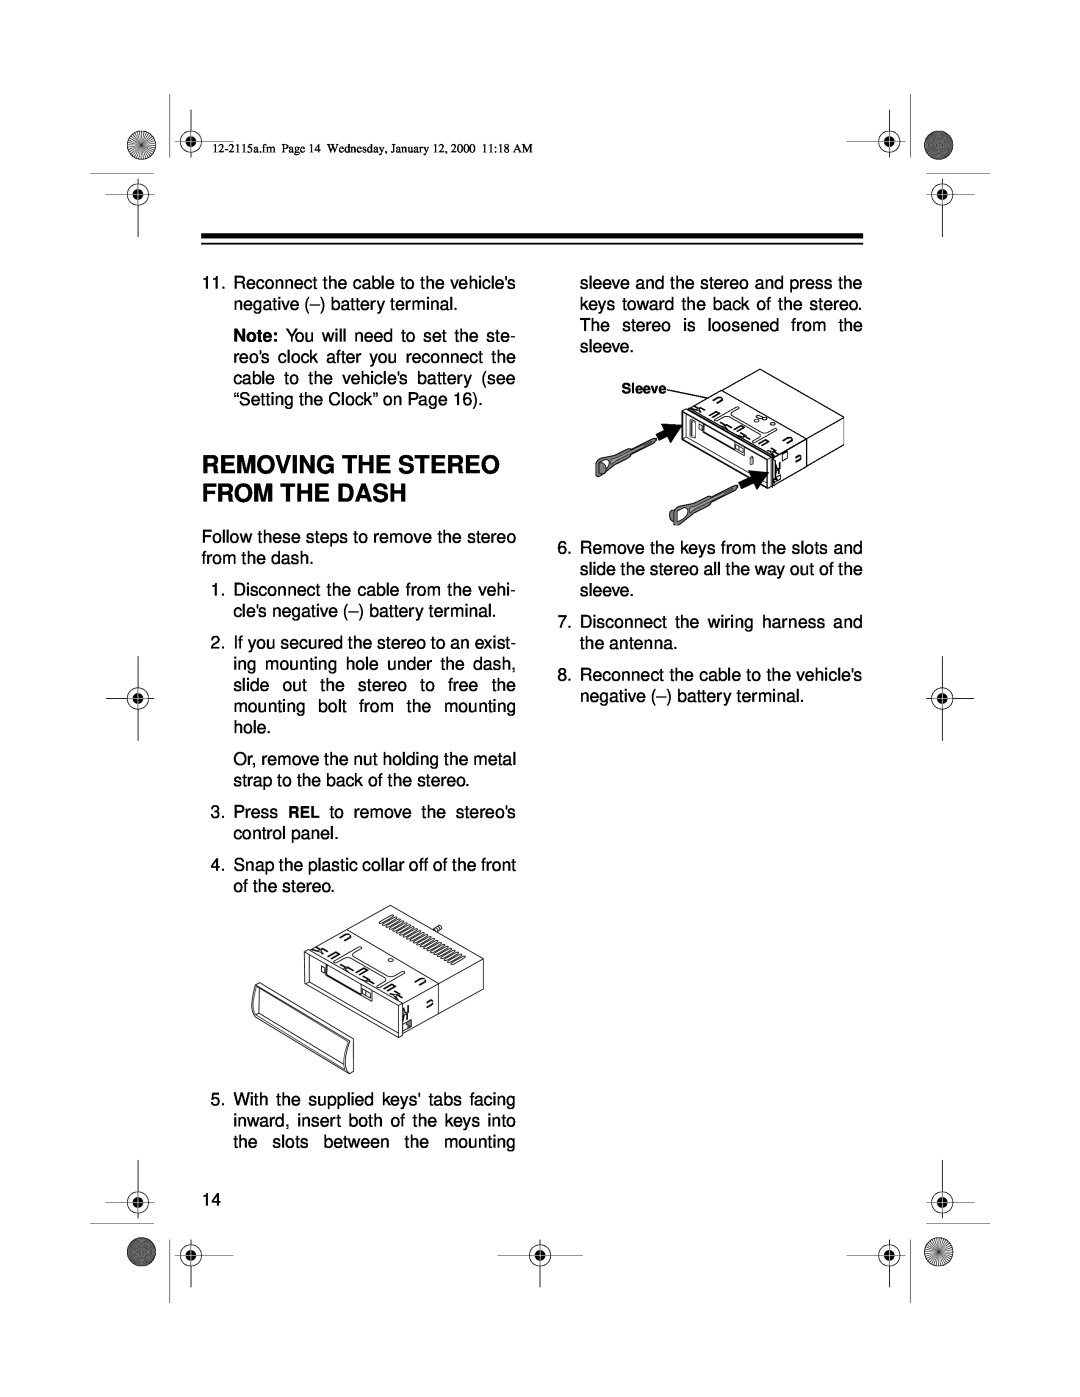 Radio Shack AM/FM Stereo Cassette owner manual Removing The Stereo From The Dash 